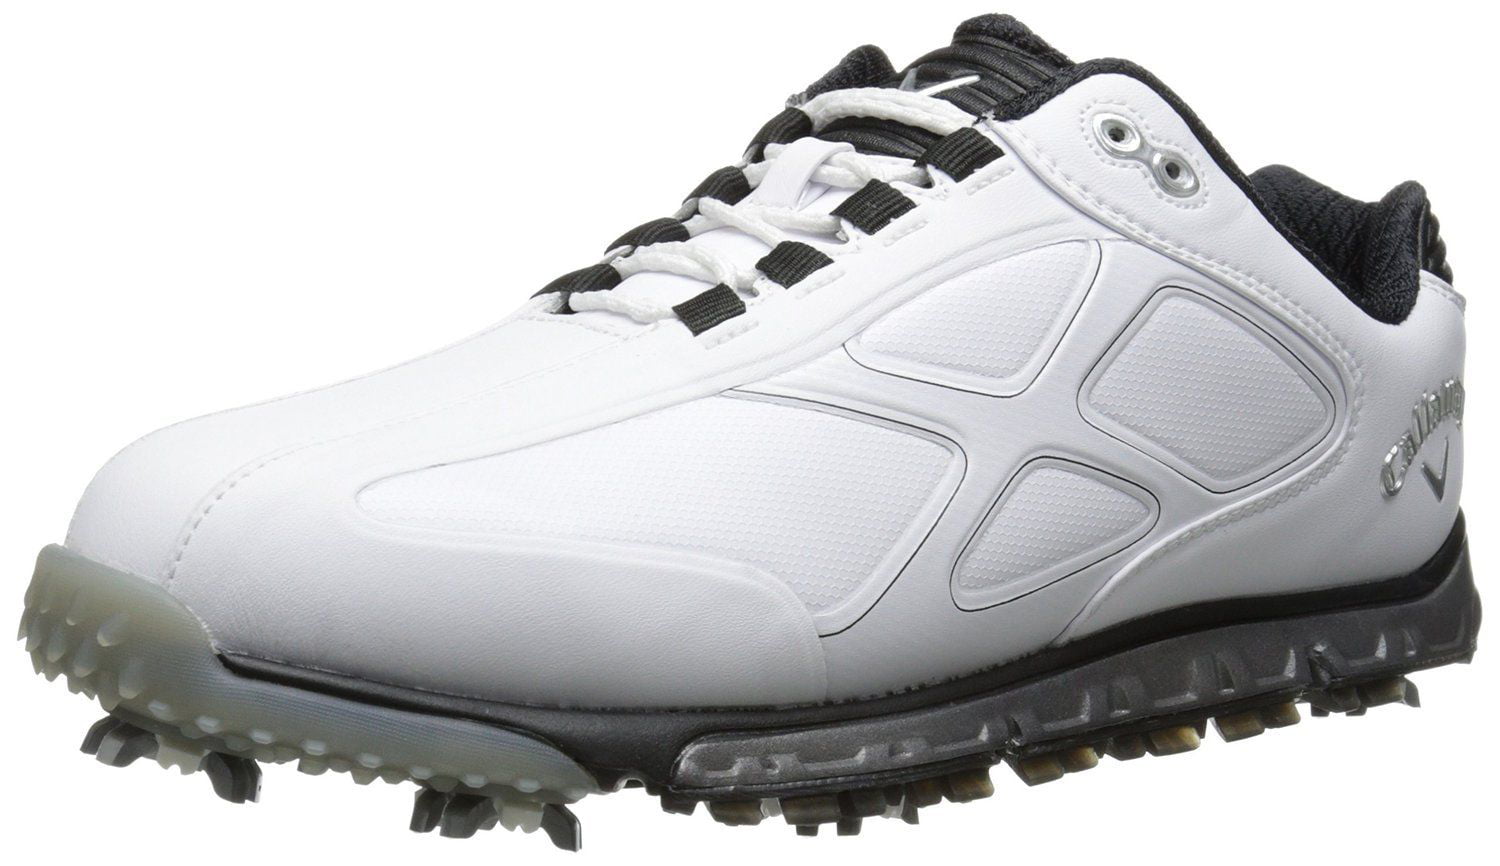 Golf Ball Shoes Review- Find The Best For You - PXG Golf Club Review